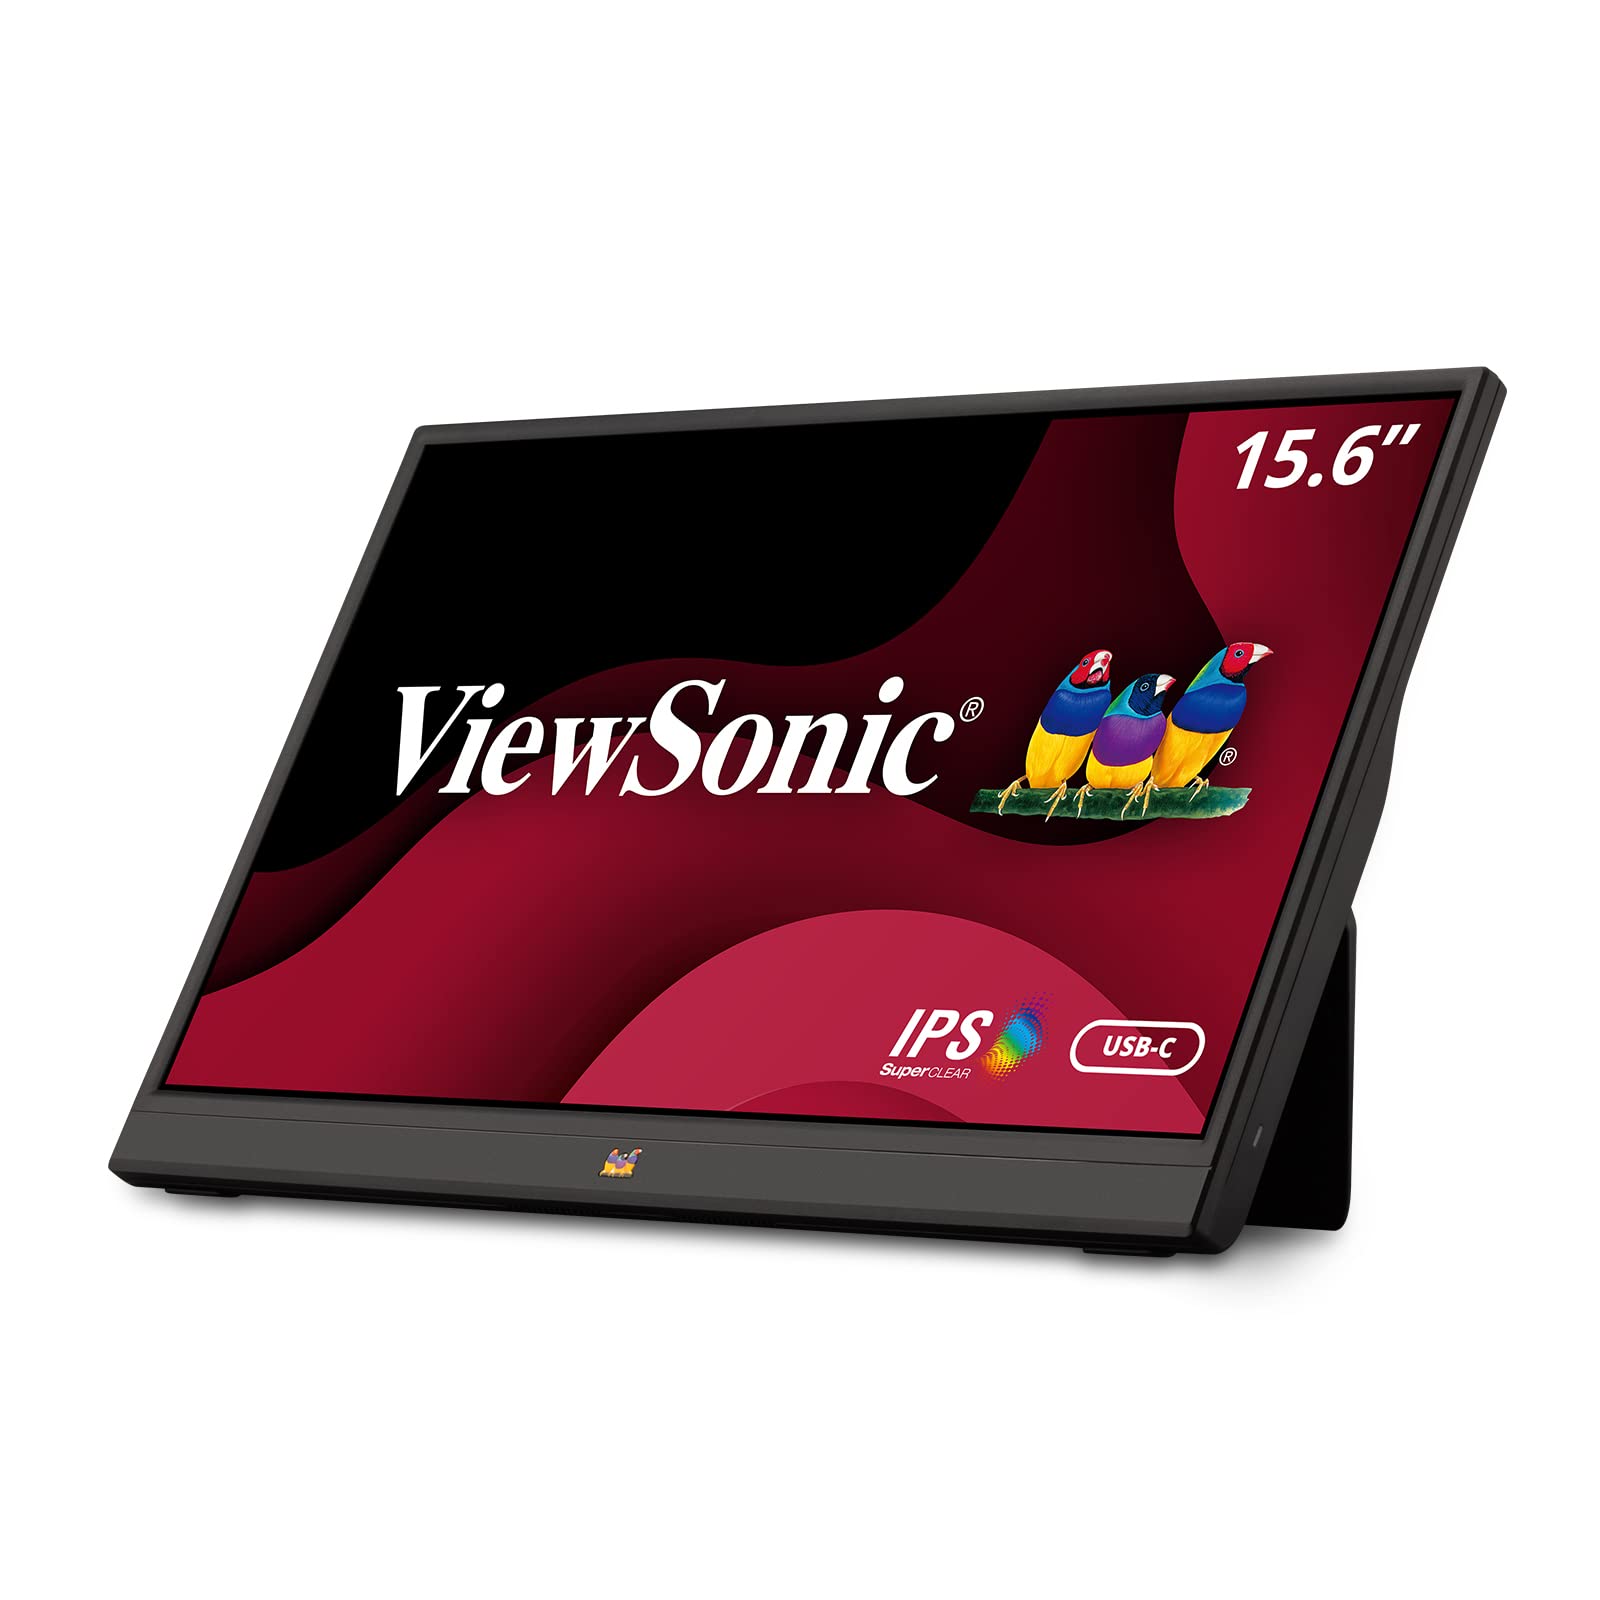 Viewsonic VA1655 15.6 Inch 1080p Portable IPS Monitor with a Built-in Stand, Mobile Ergonomics, USB C, Mini HDMI and Protective Case for Home and Office,Black